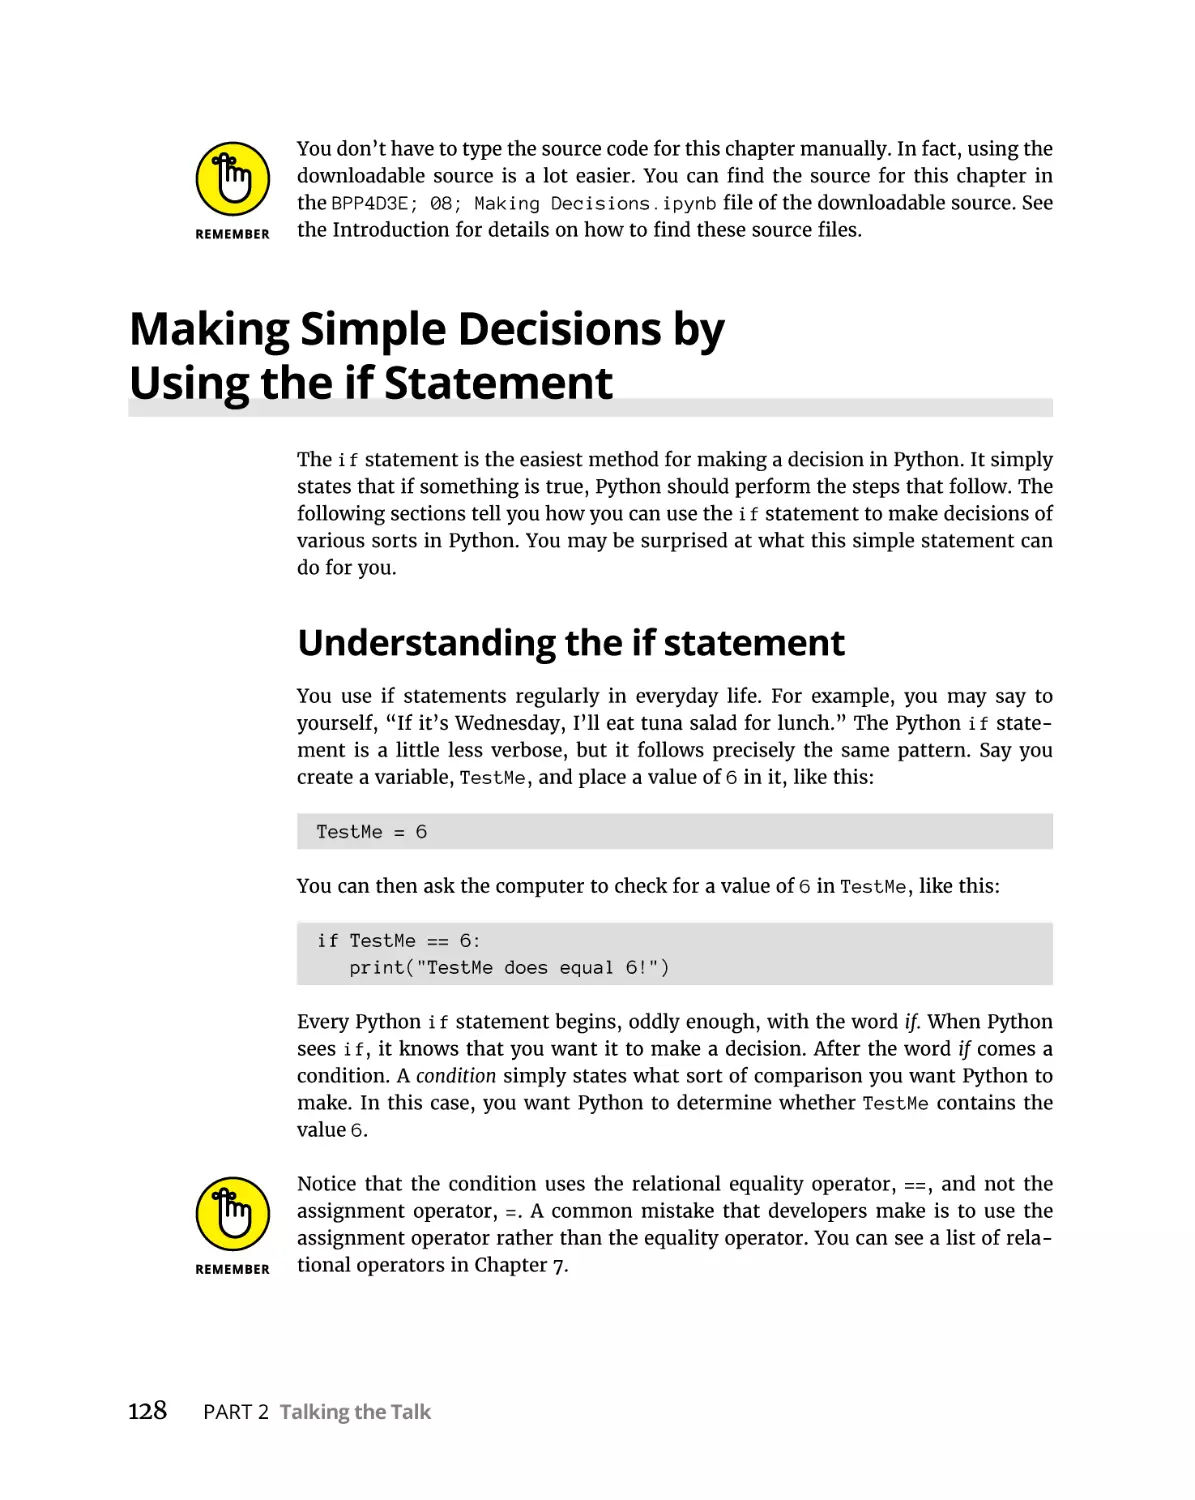 Making Simple Decisions by Using the if Statement
Understanding the if statement